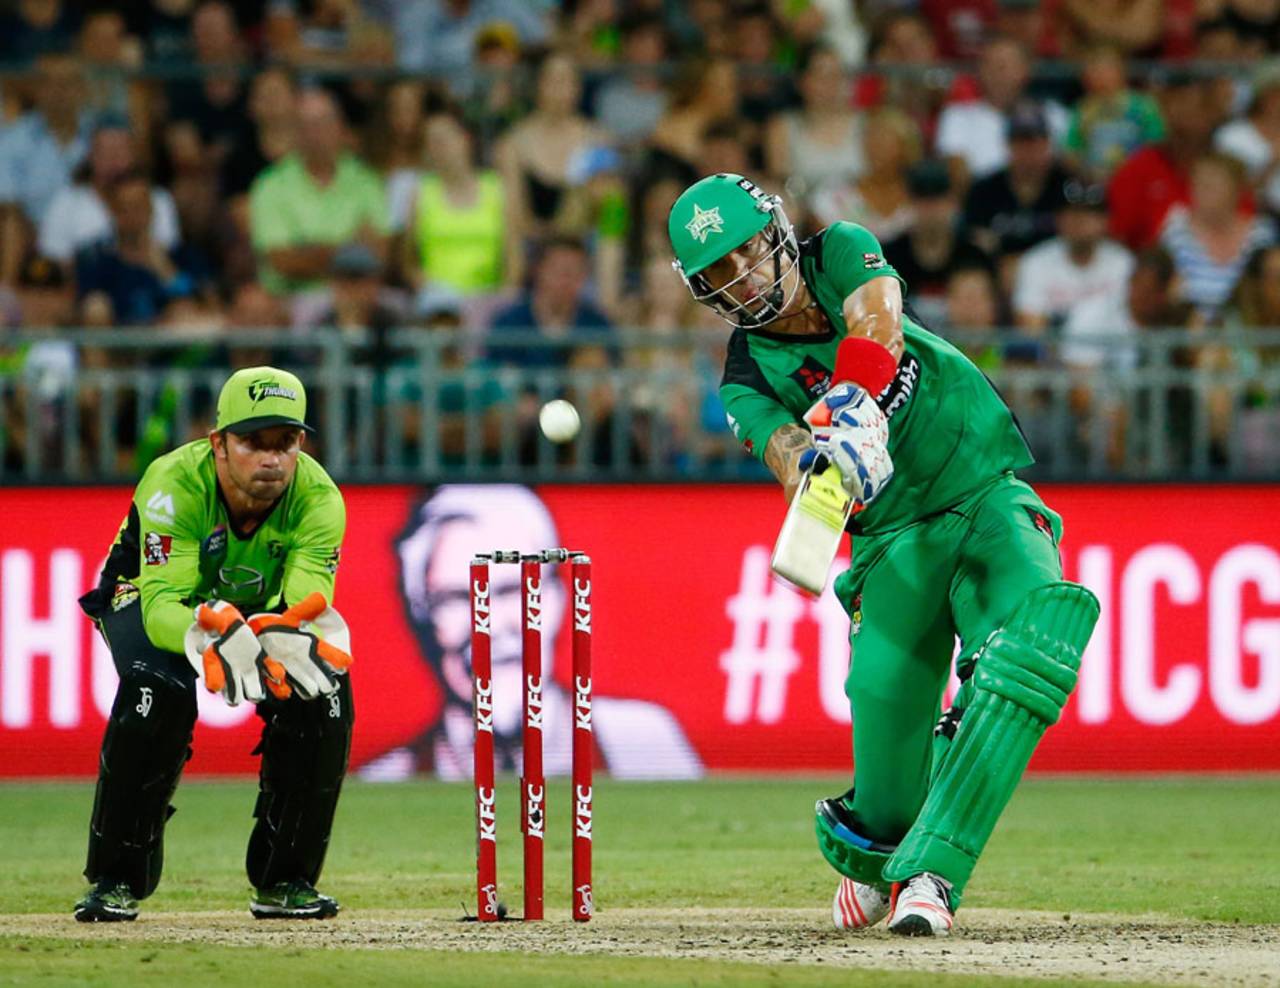 Kevin Pietersen muscled 10 fours and a six during his 42-ball 67, Sydney Thunder v Melbourne Stars, BBL 2014-15, Sydney, January 17, 2015